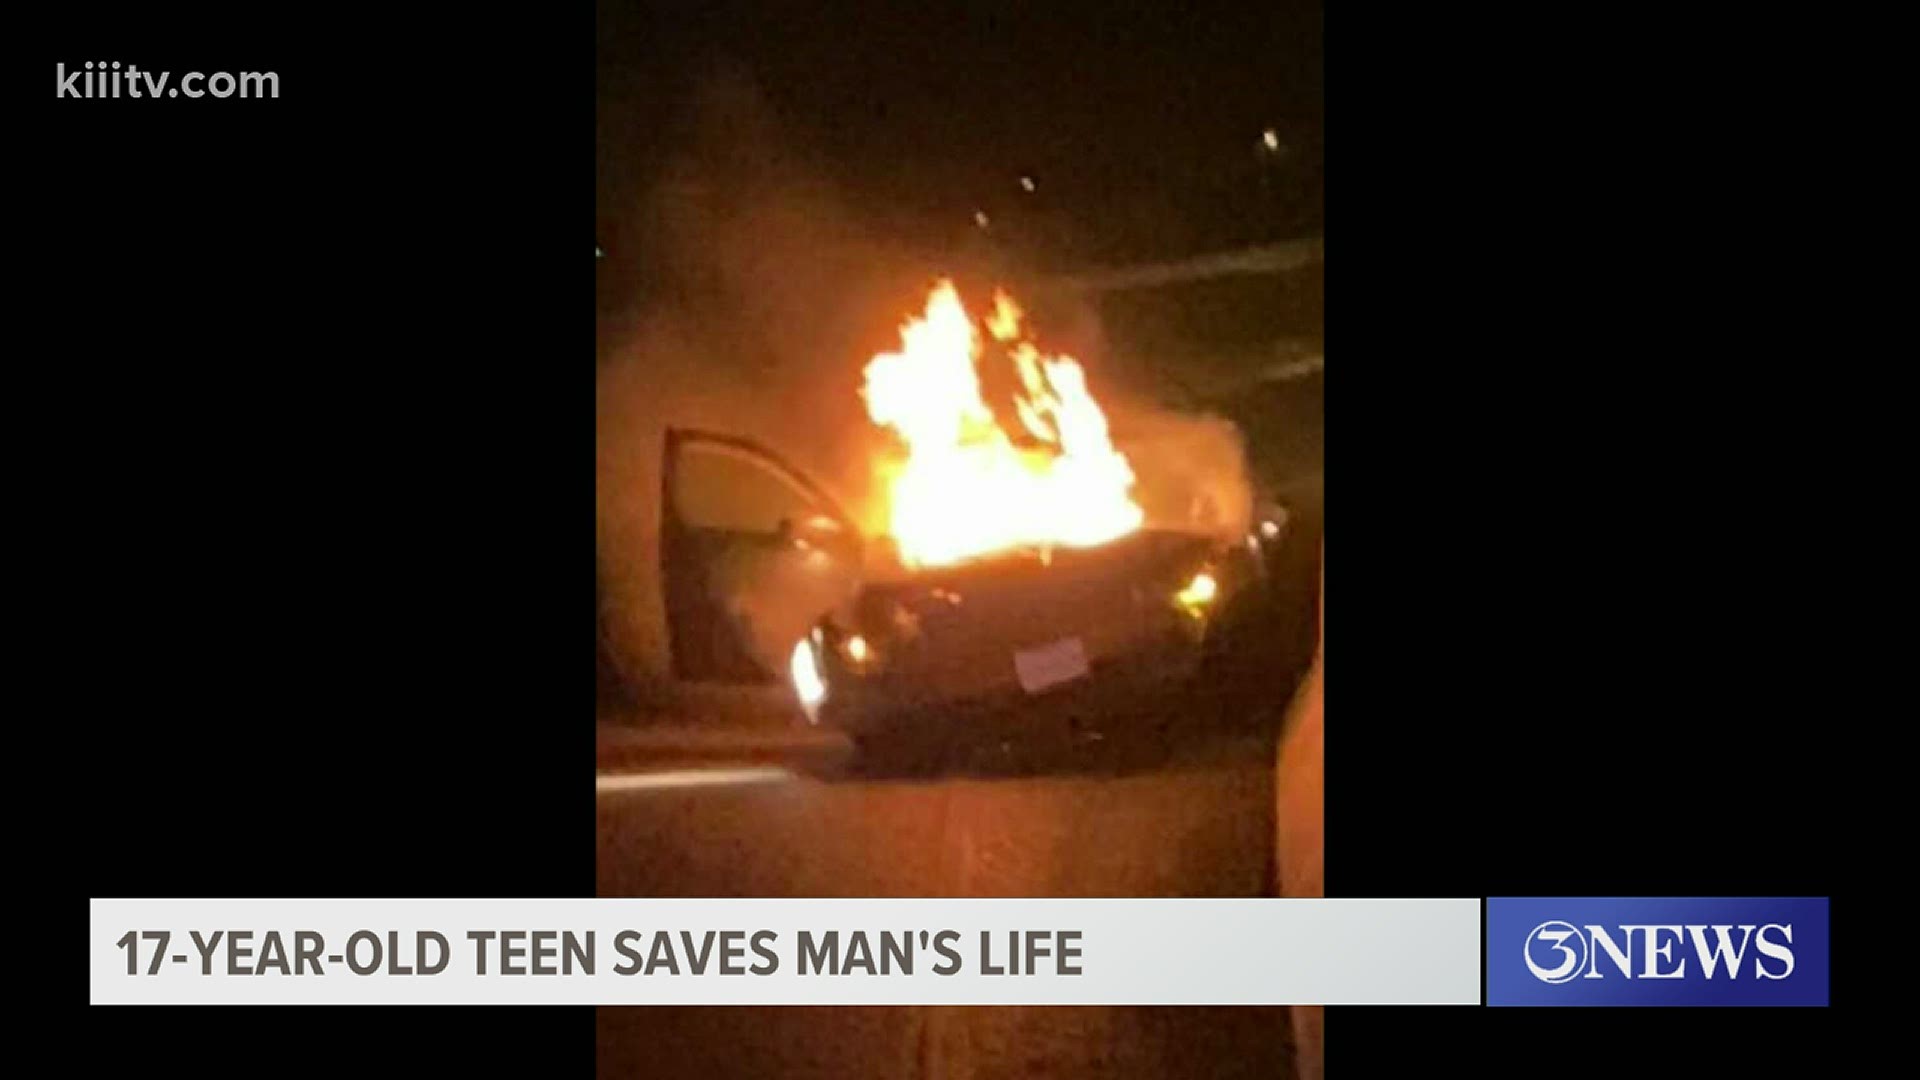 The 17-year-old was traveling with his family when they saw the burning car on the highway.